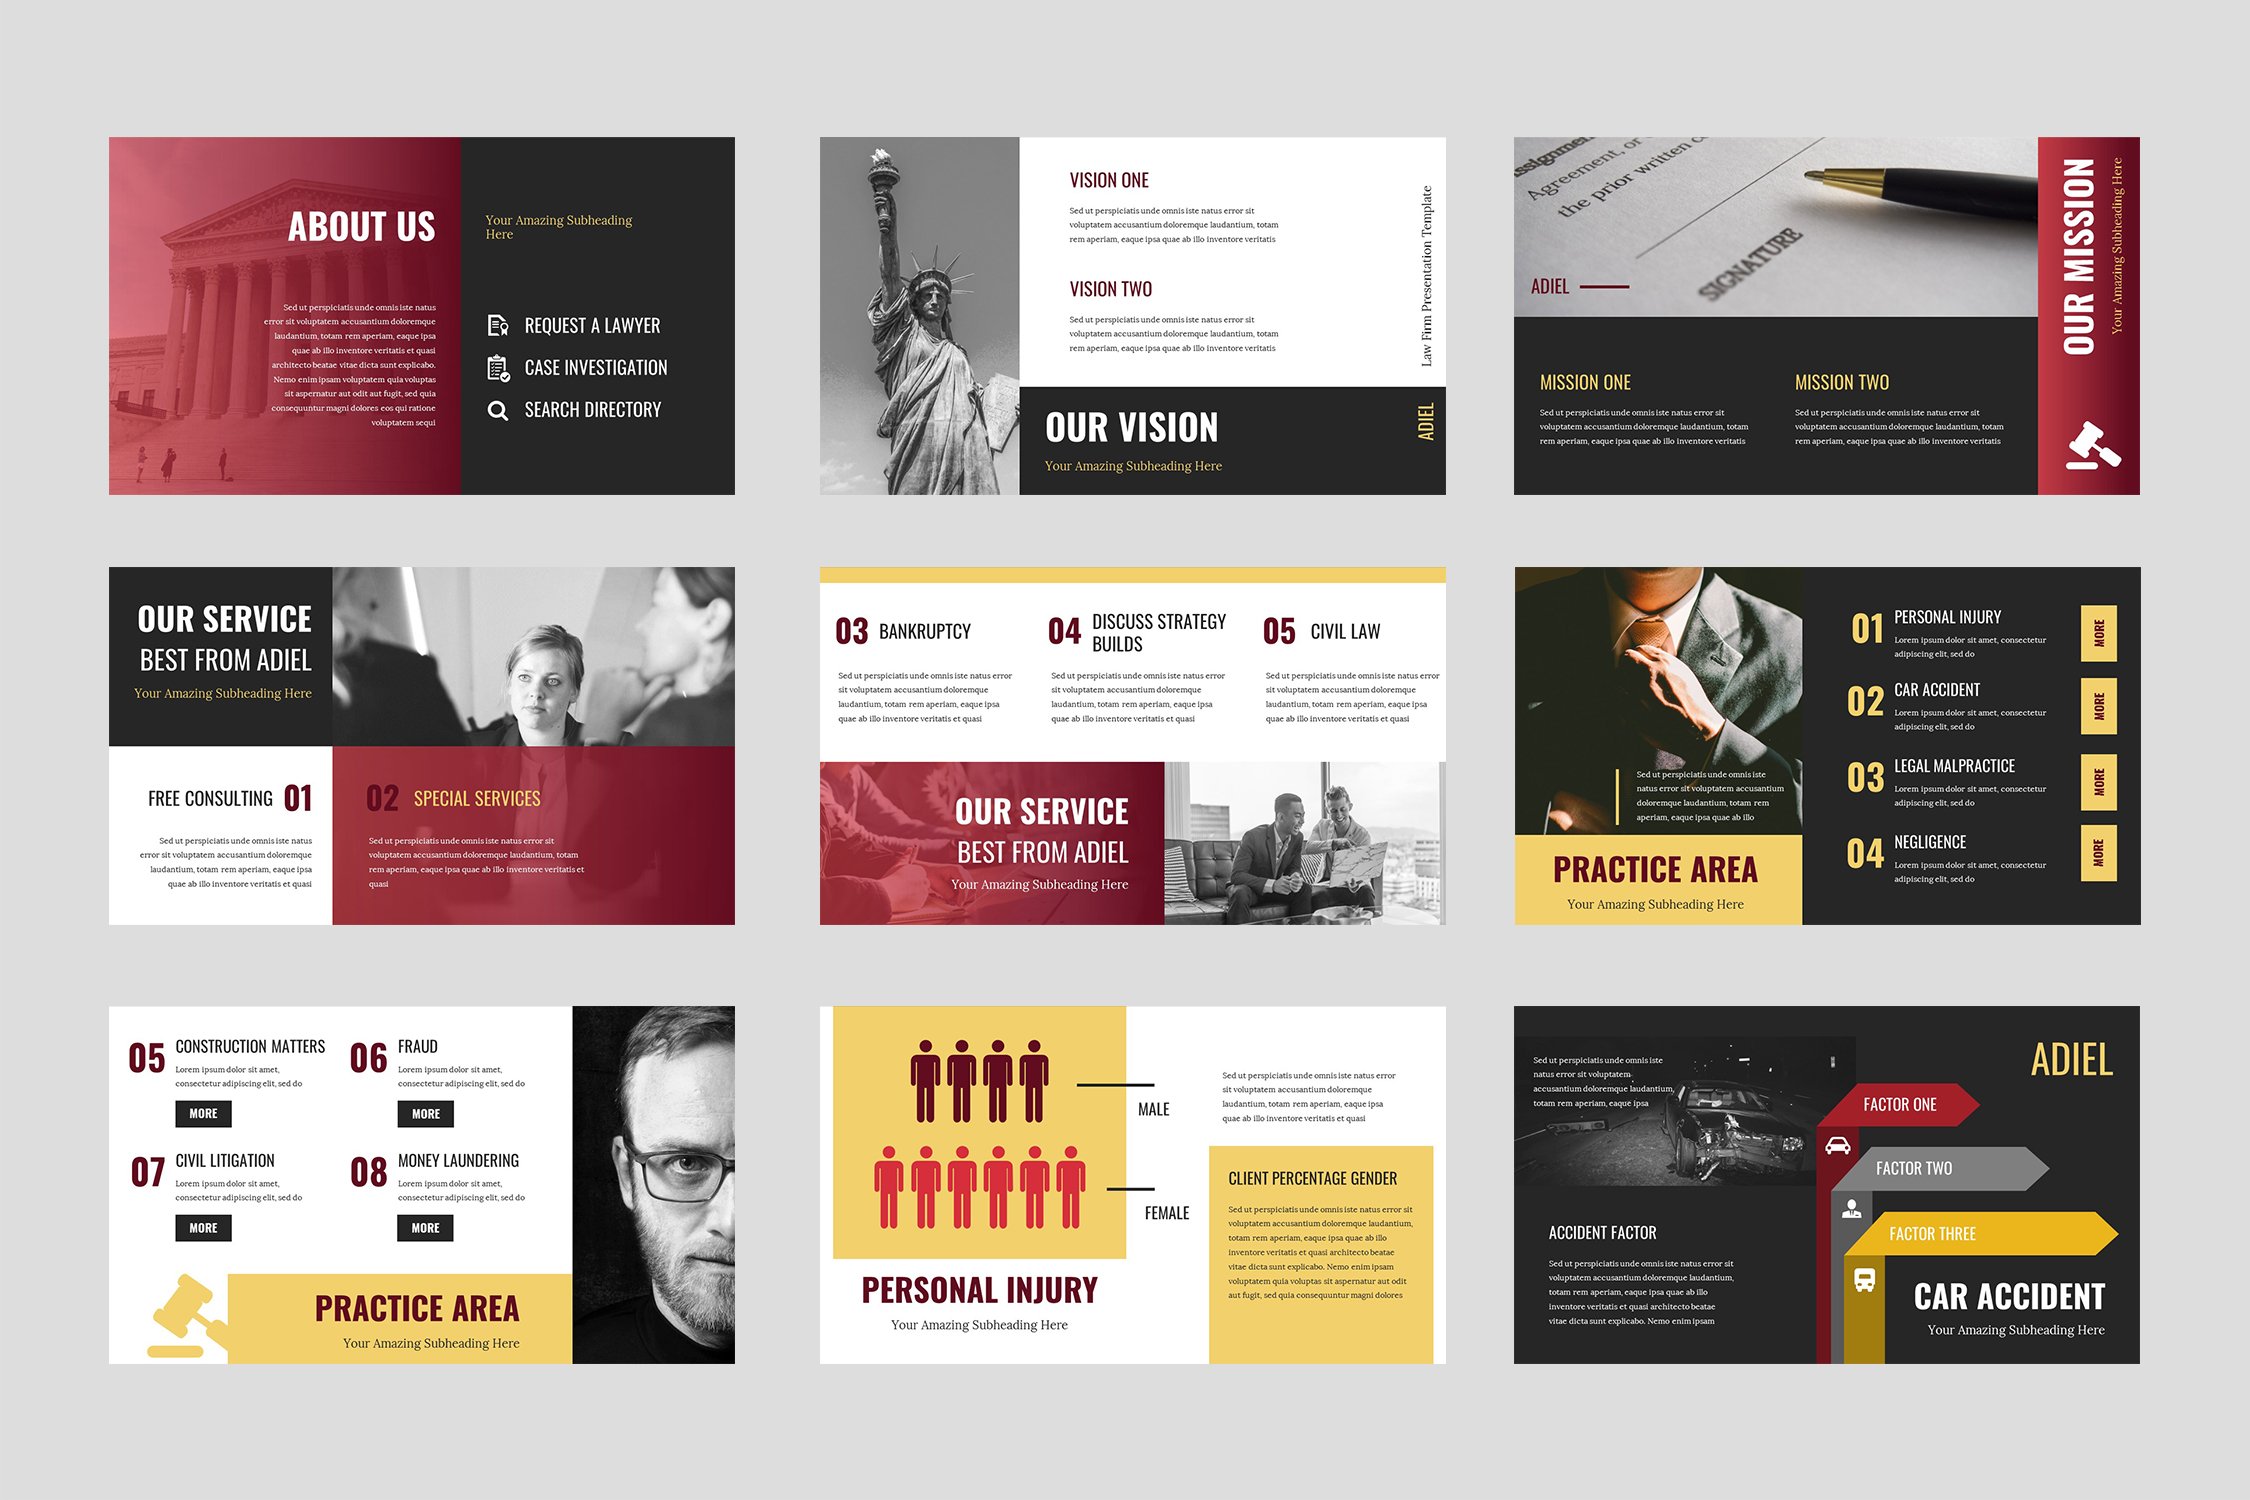 Slides include infographics and diagrams in red and yellow colors.